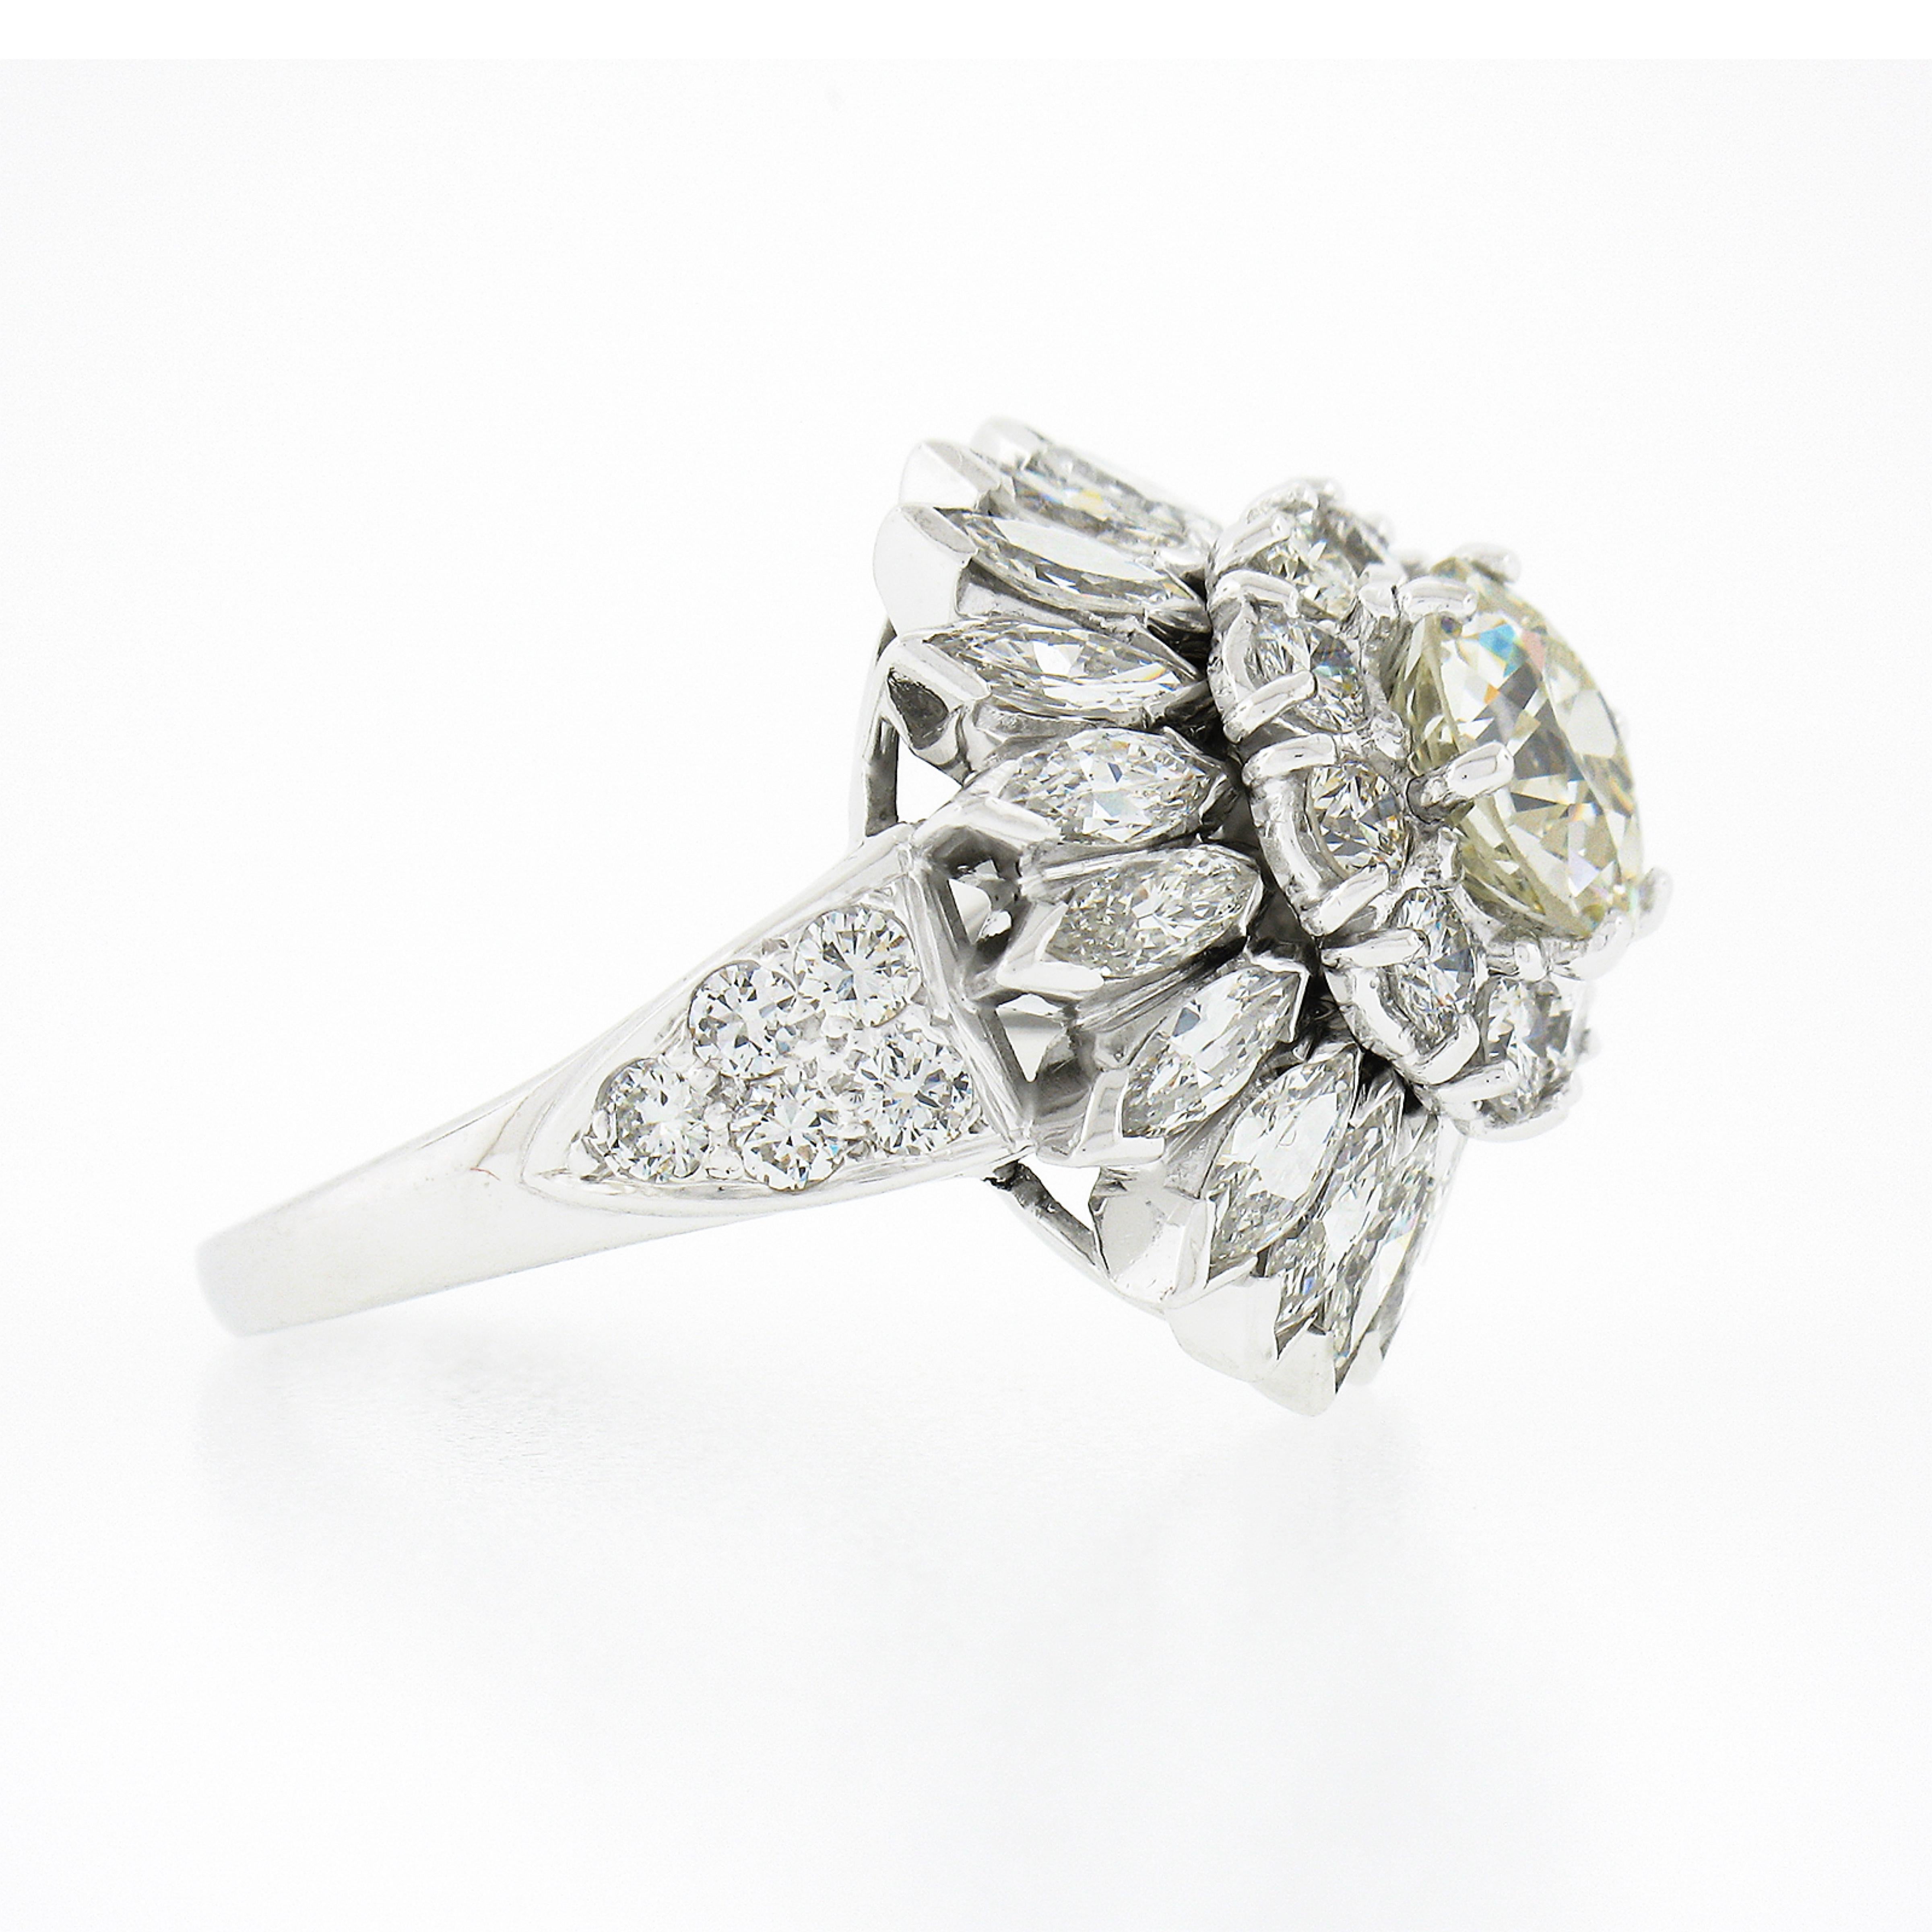 This truly jaw dropping engagement or cocktail diamond ring is crafted in solid platinum and is completely drenched in very fine quality diamonds throughout this incredible and substantial design. It features a gorgeous, GIA certified, old European